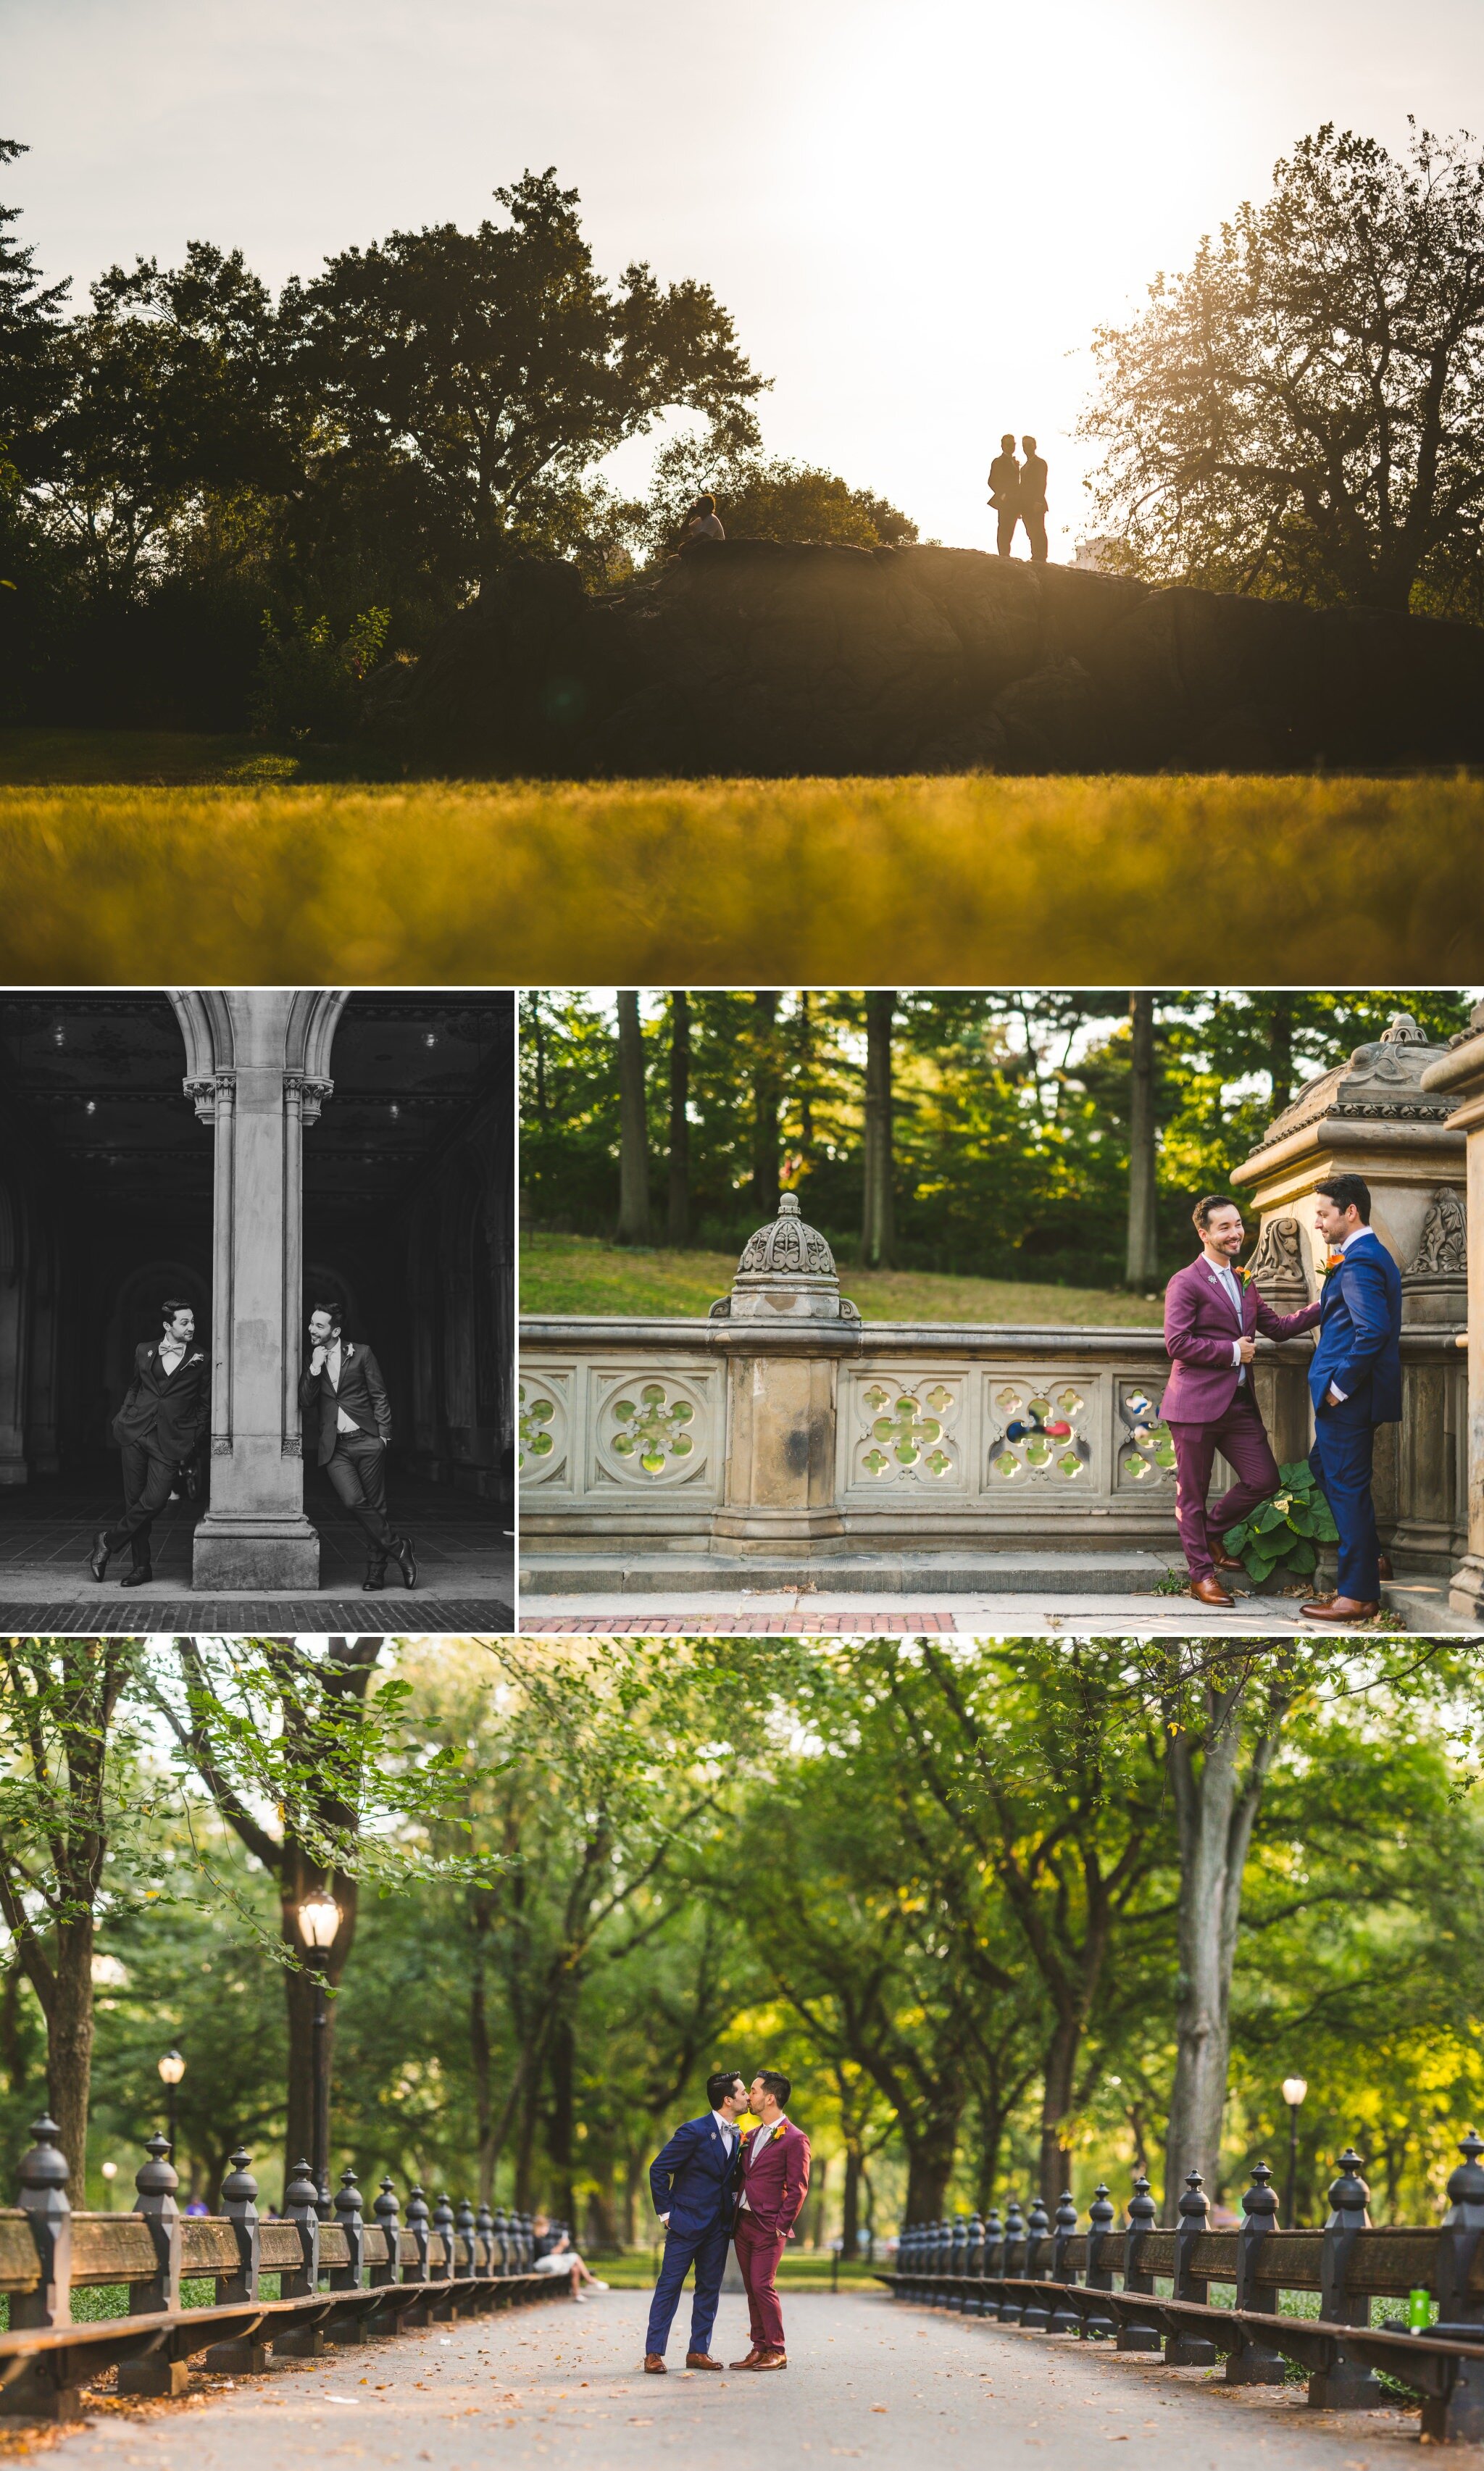  Photographs from Keiji and Michael's Manhattan, New York wedding at the Arthouse Hotel and the Central Park Boathouse. 